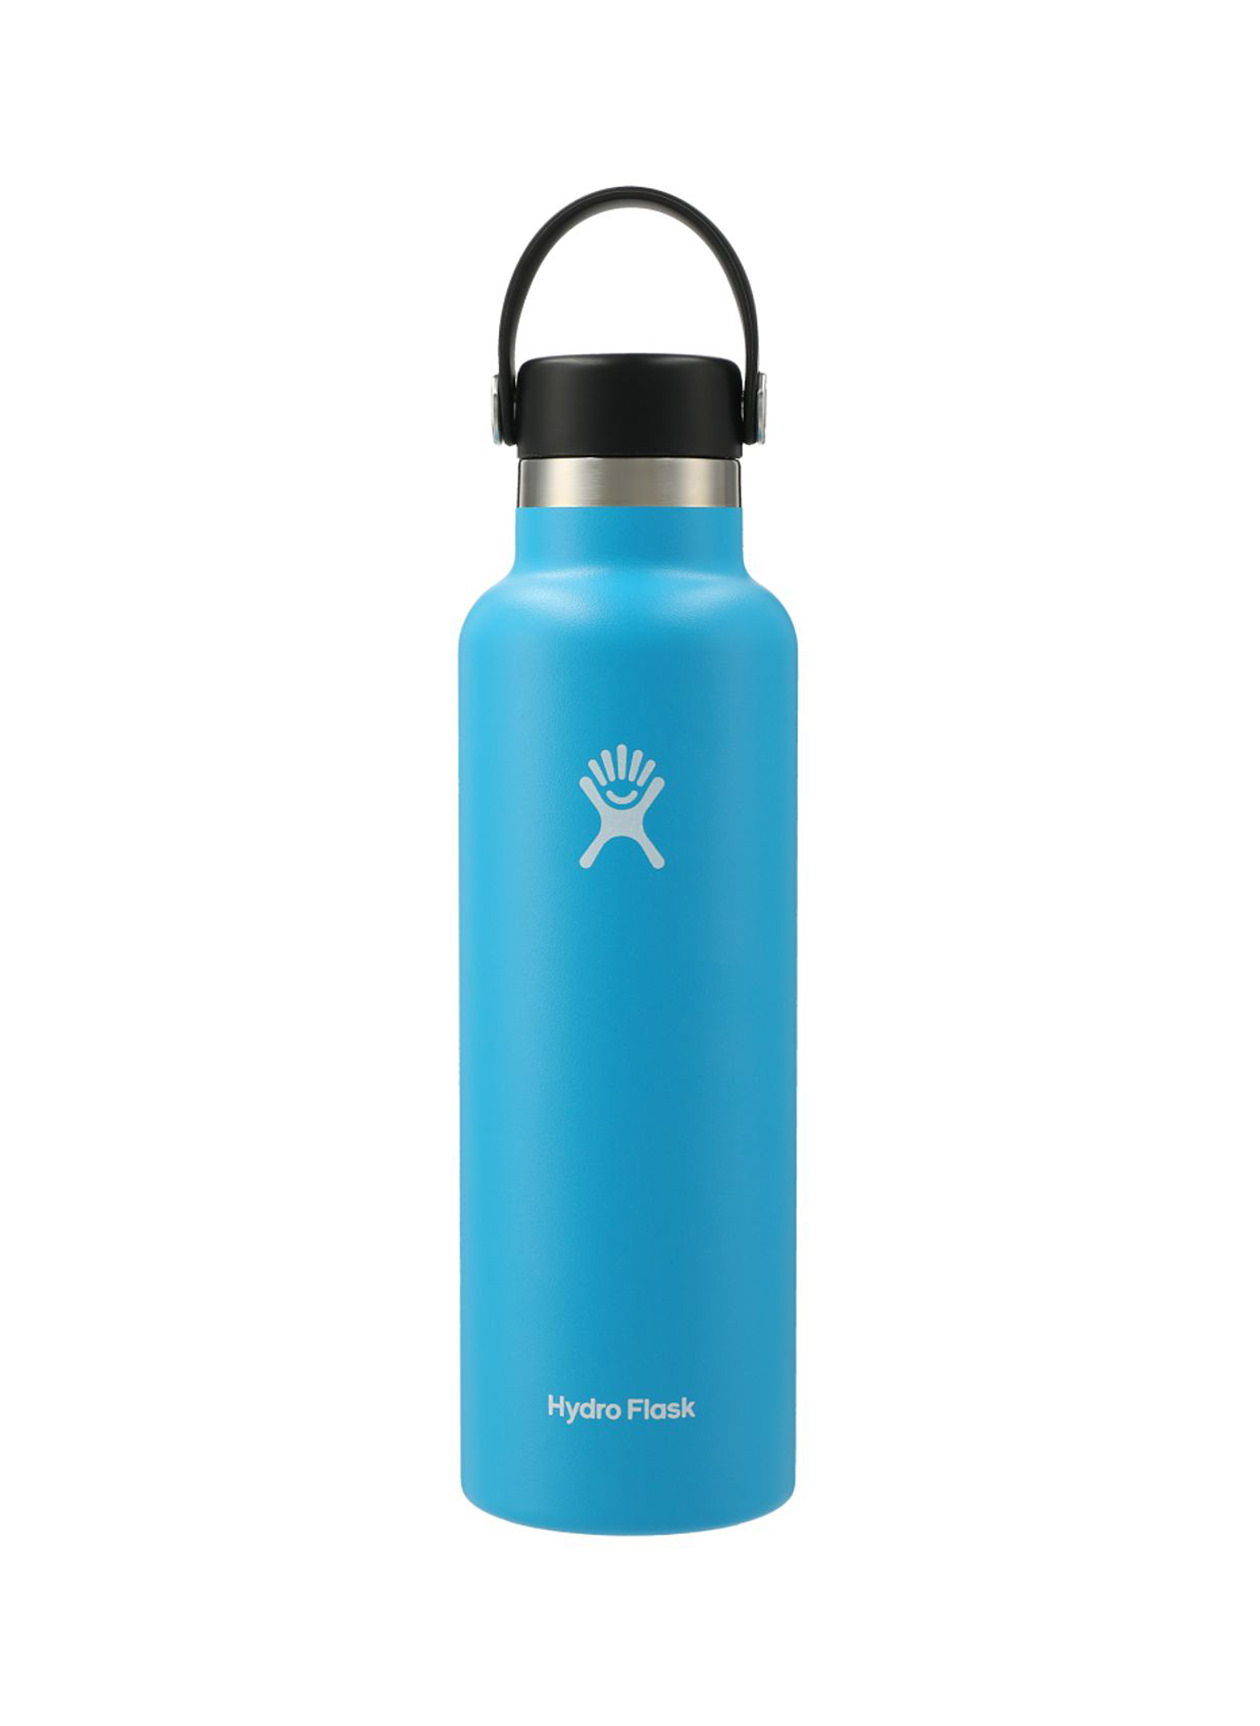 Hydro Flask Pacific Standard Mouth With Flex Cap 21oz.